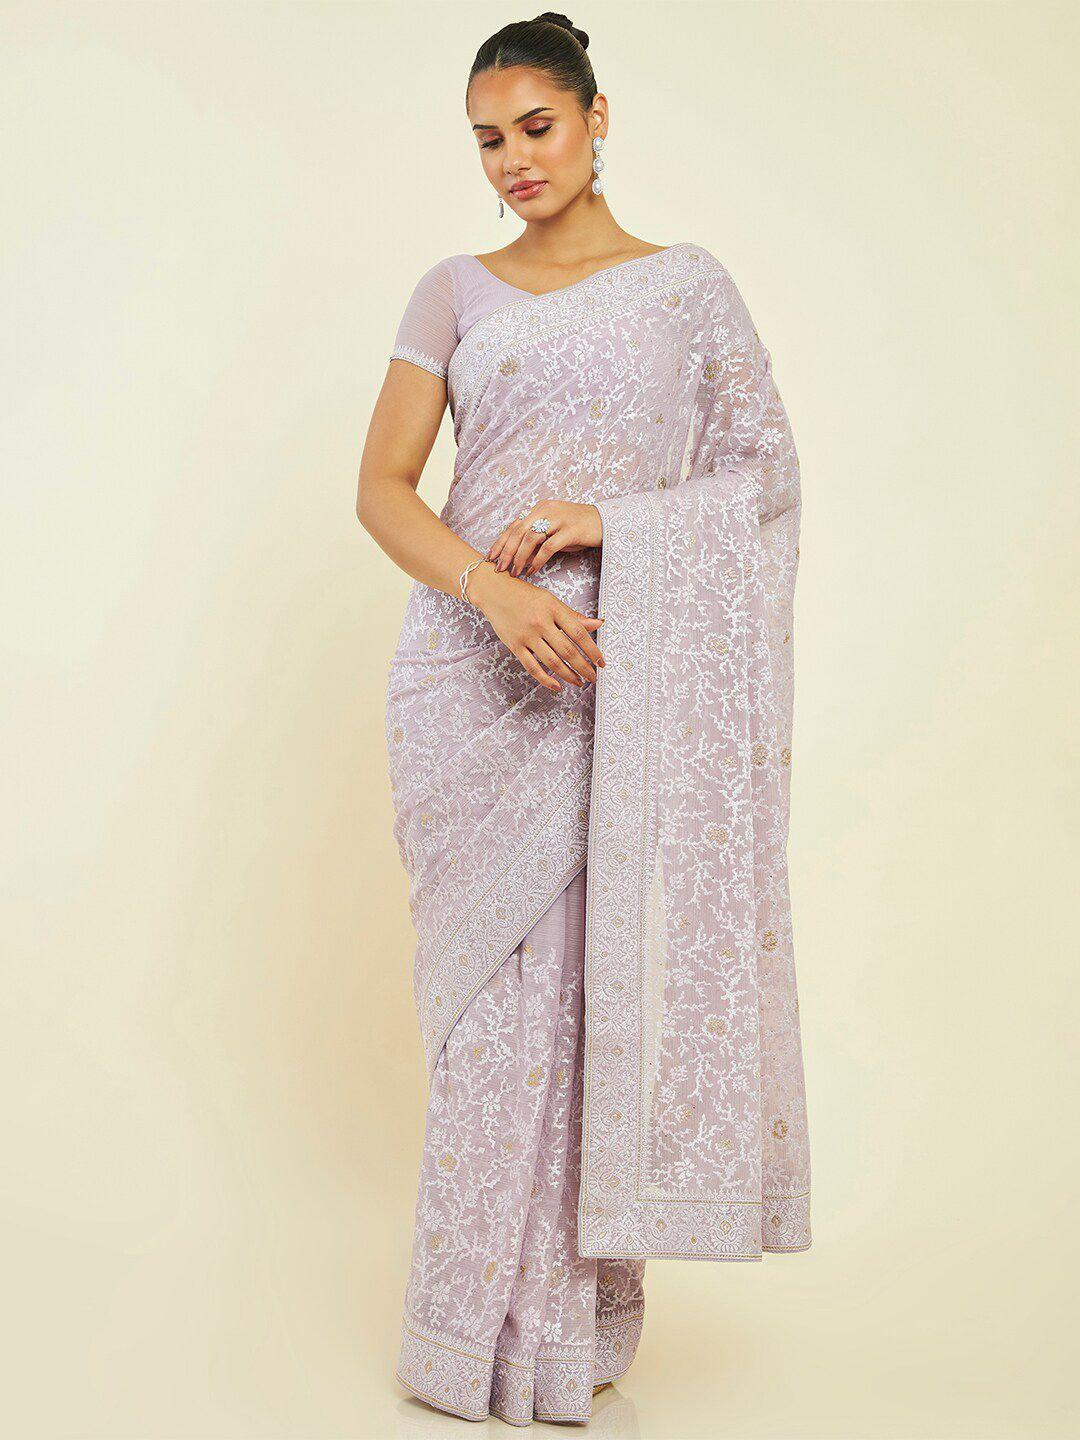 soch floral embroidered pure chiffon saree